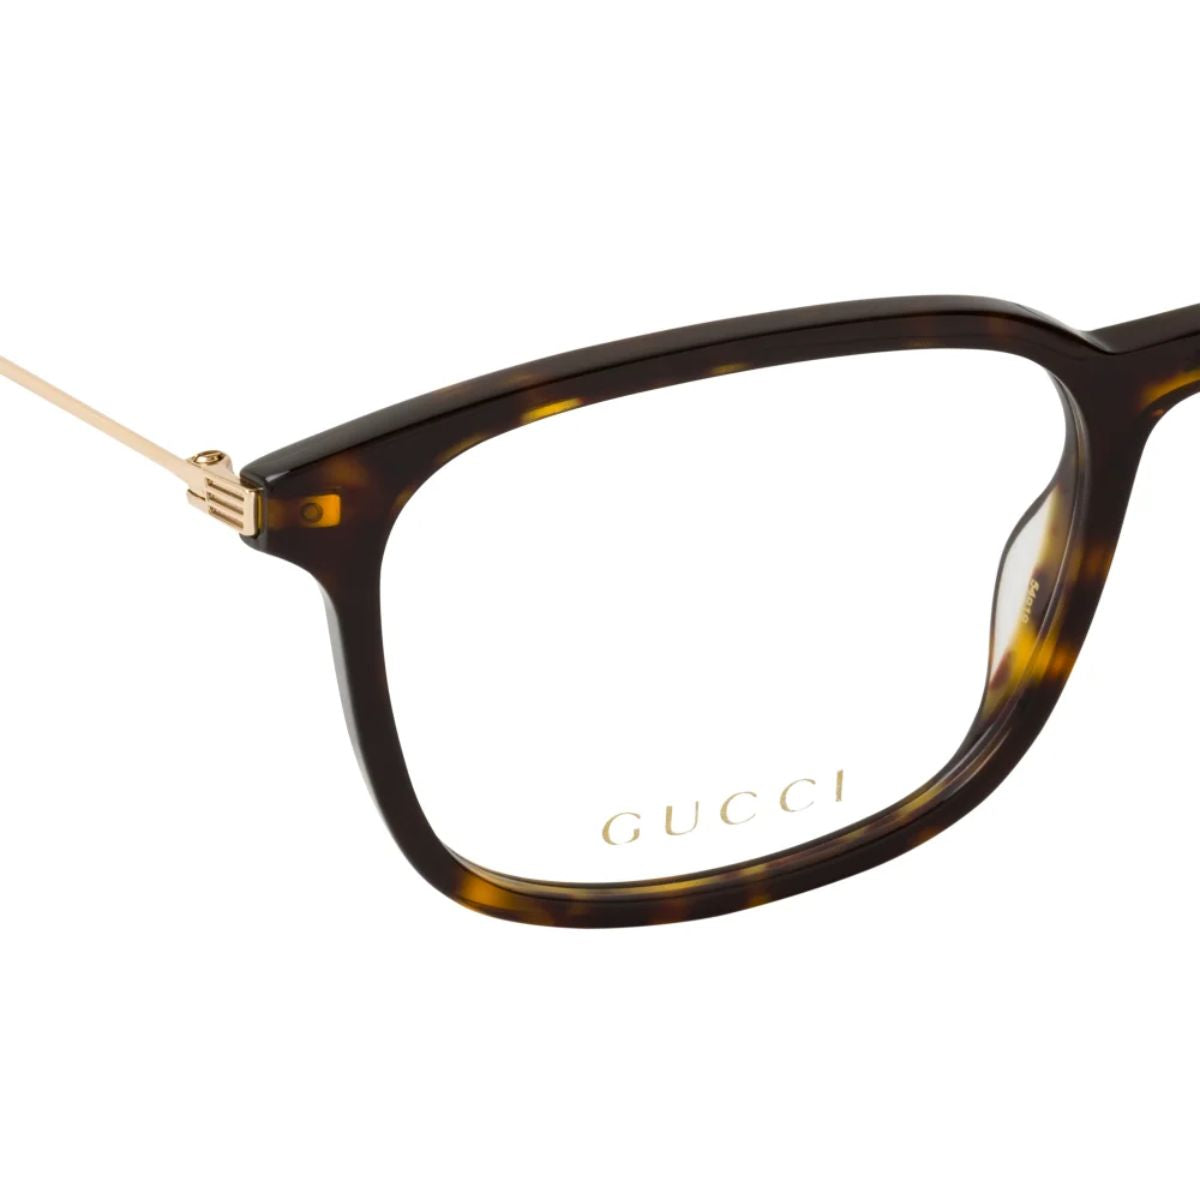 "Stylish Gucci Spectacles - Model 1577O 006 frames offering sophistication and functionality for all."